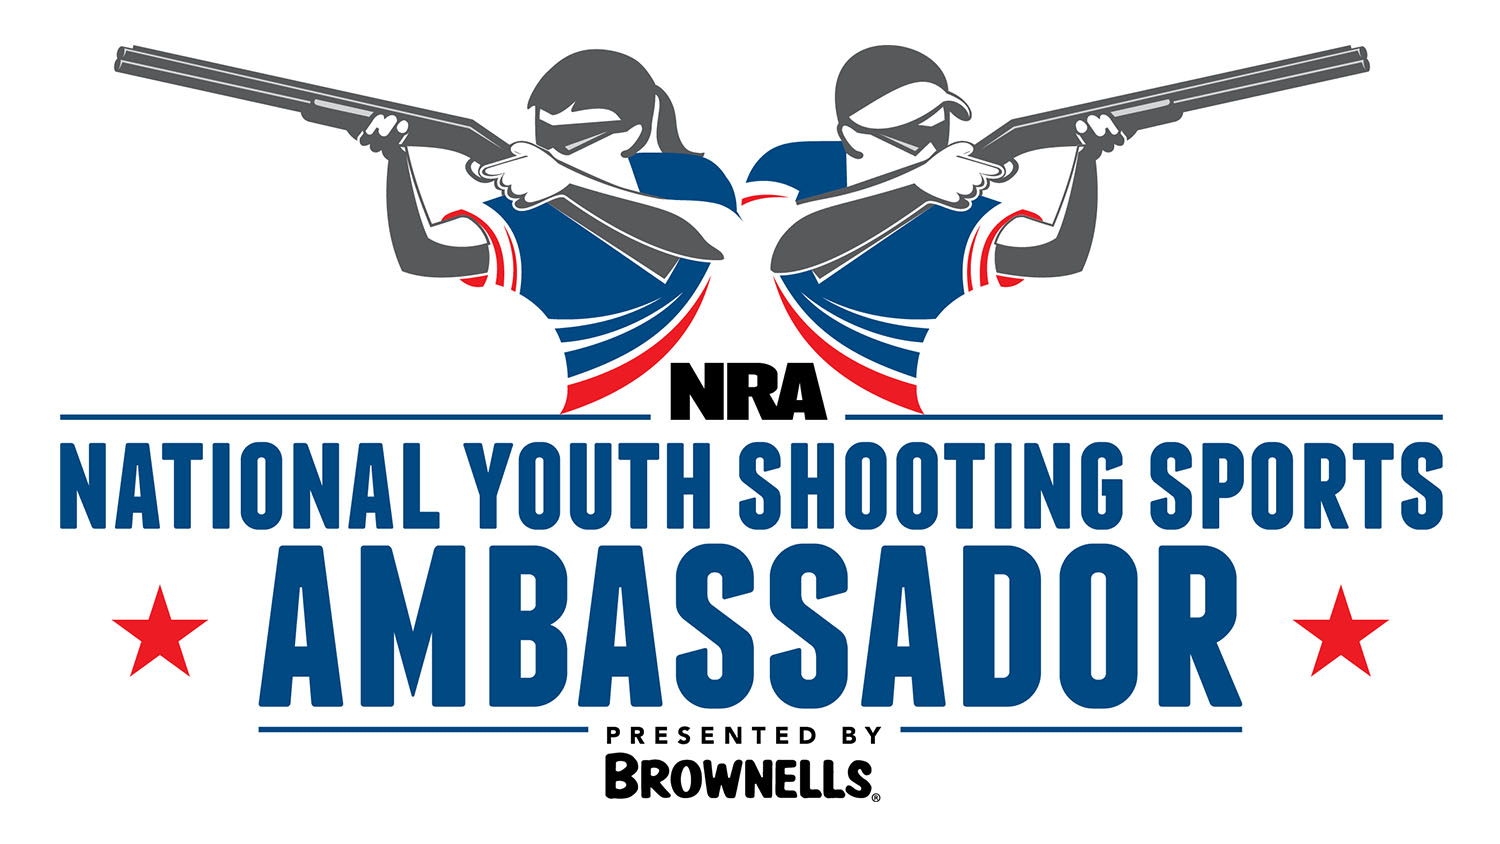 NRA Launches Search For 2019 National Youth Shooting Sports Ambassadors Presented by Brownells